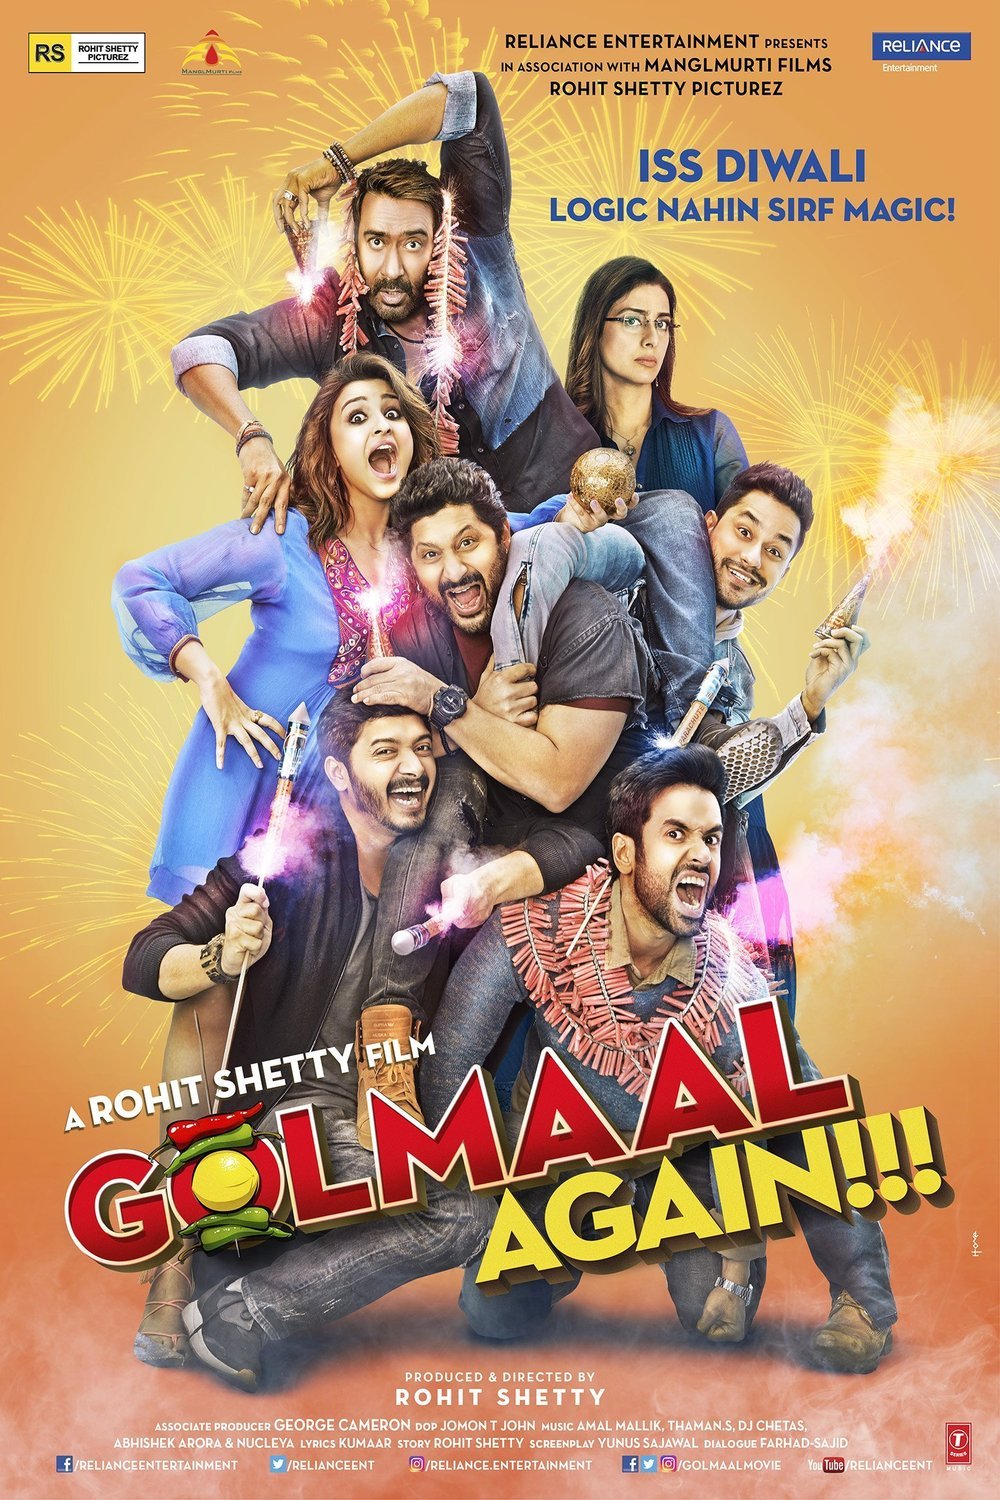 Poster of the movie Golmaal Again